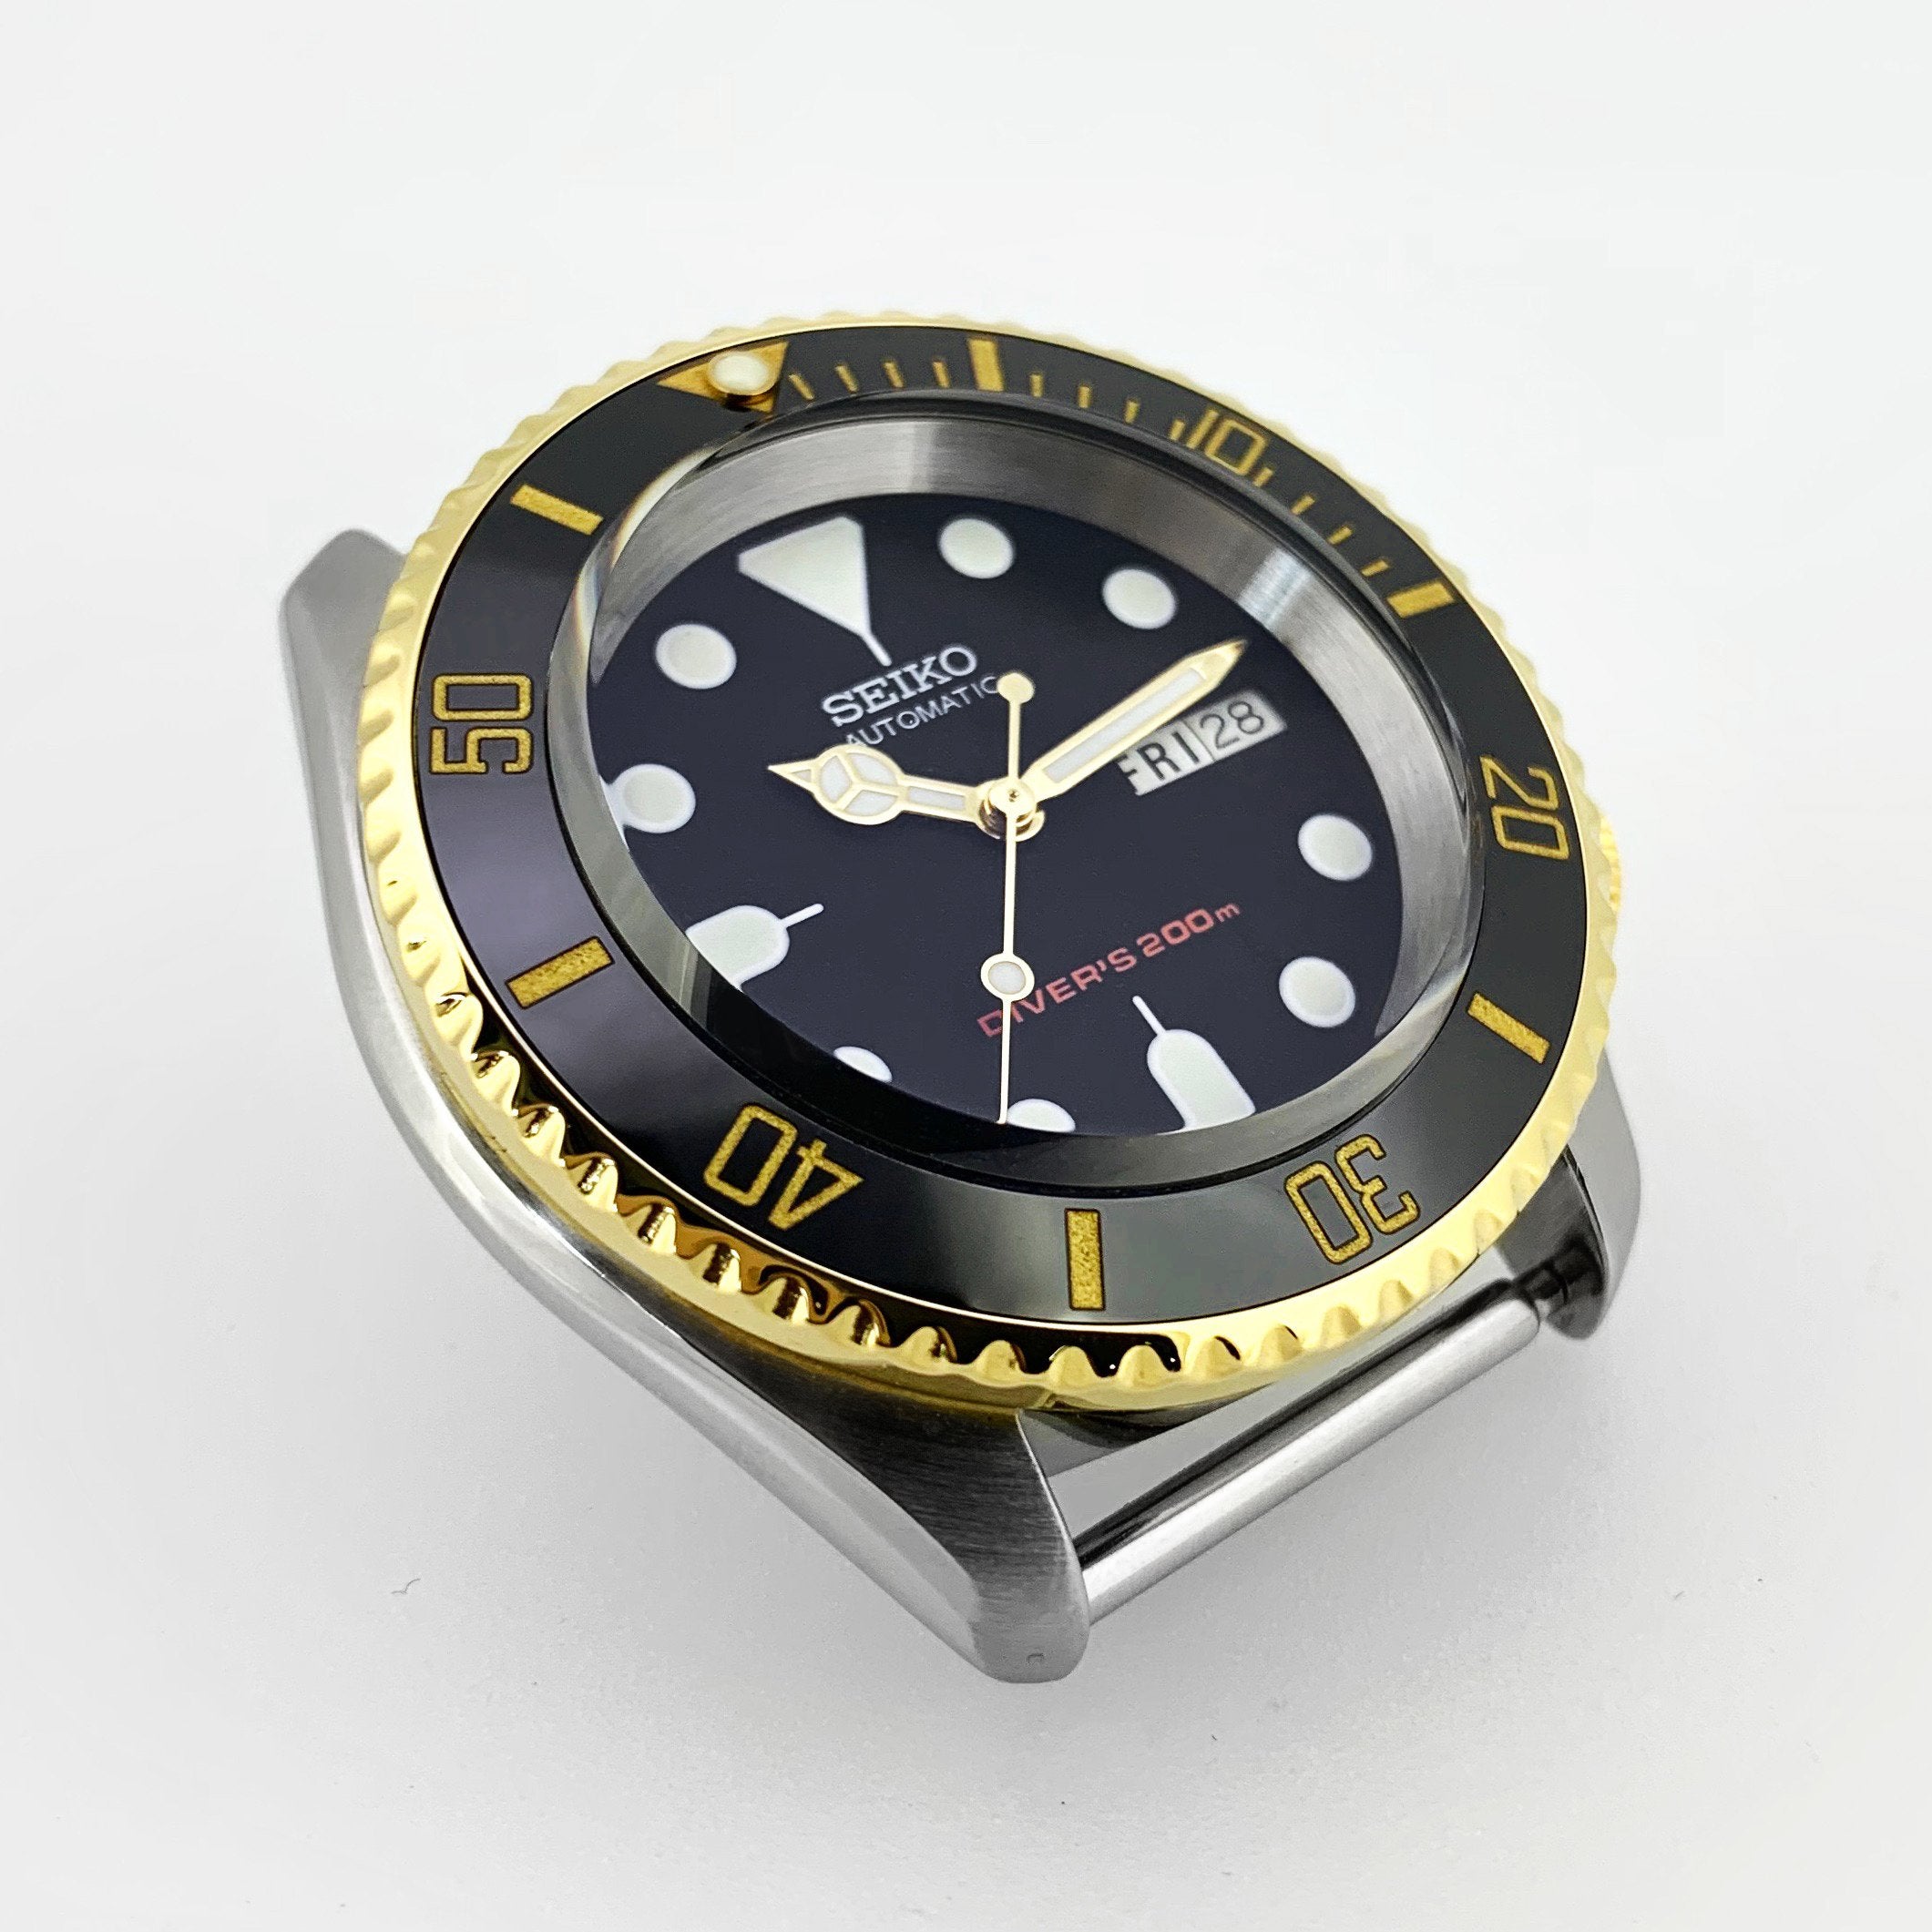 Bezel - SKX007/SRPD Deep Sea - Polished PVD Gold - DLW WATCHES